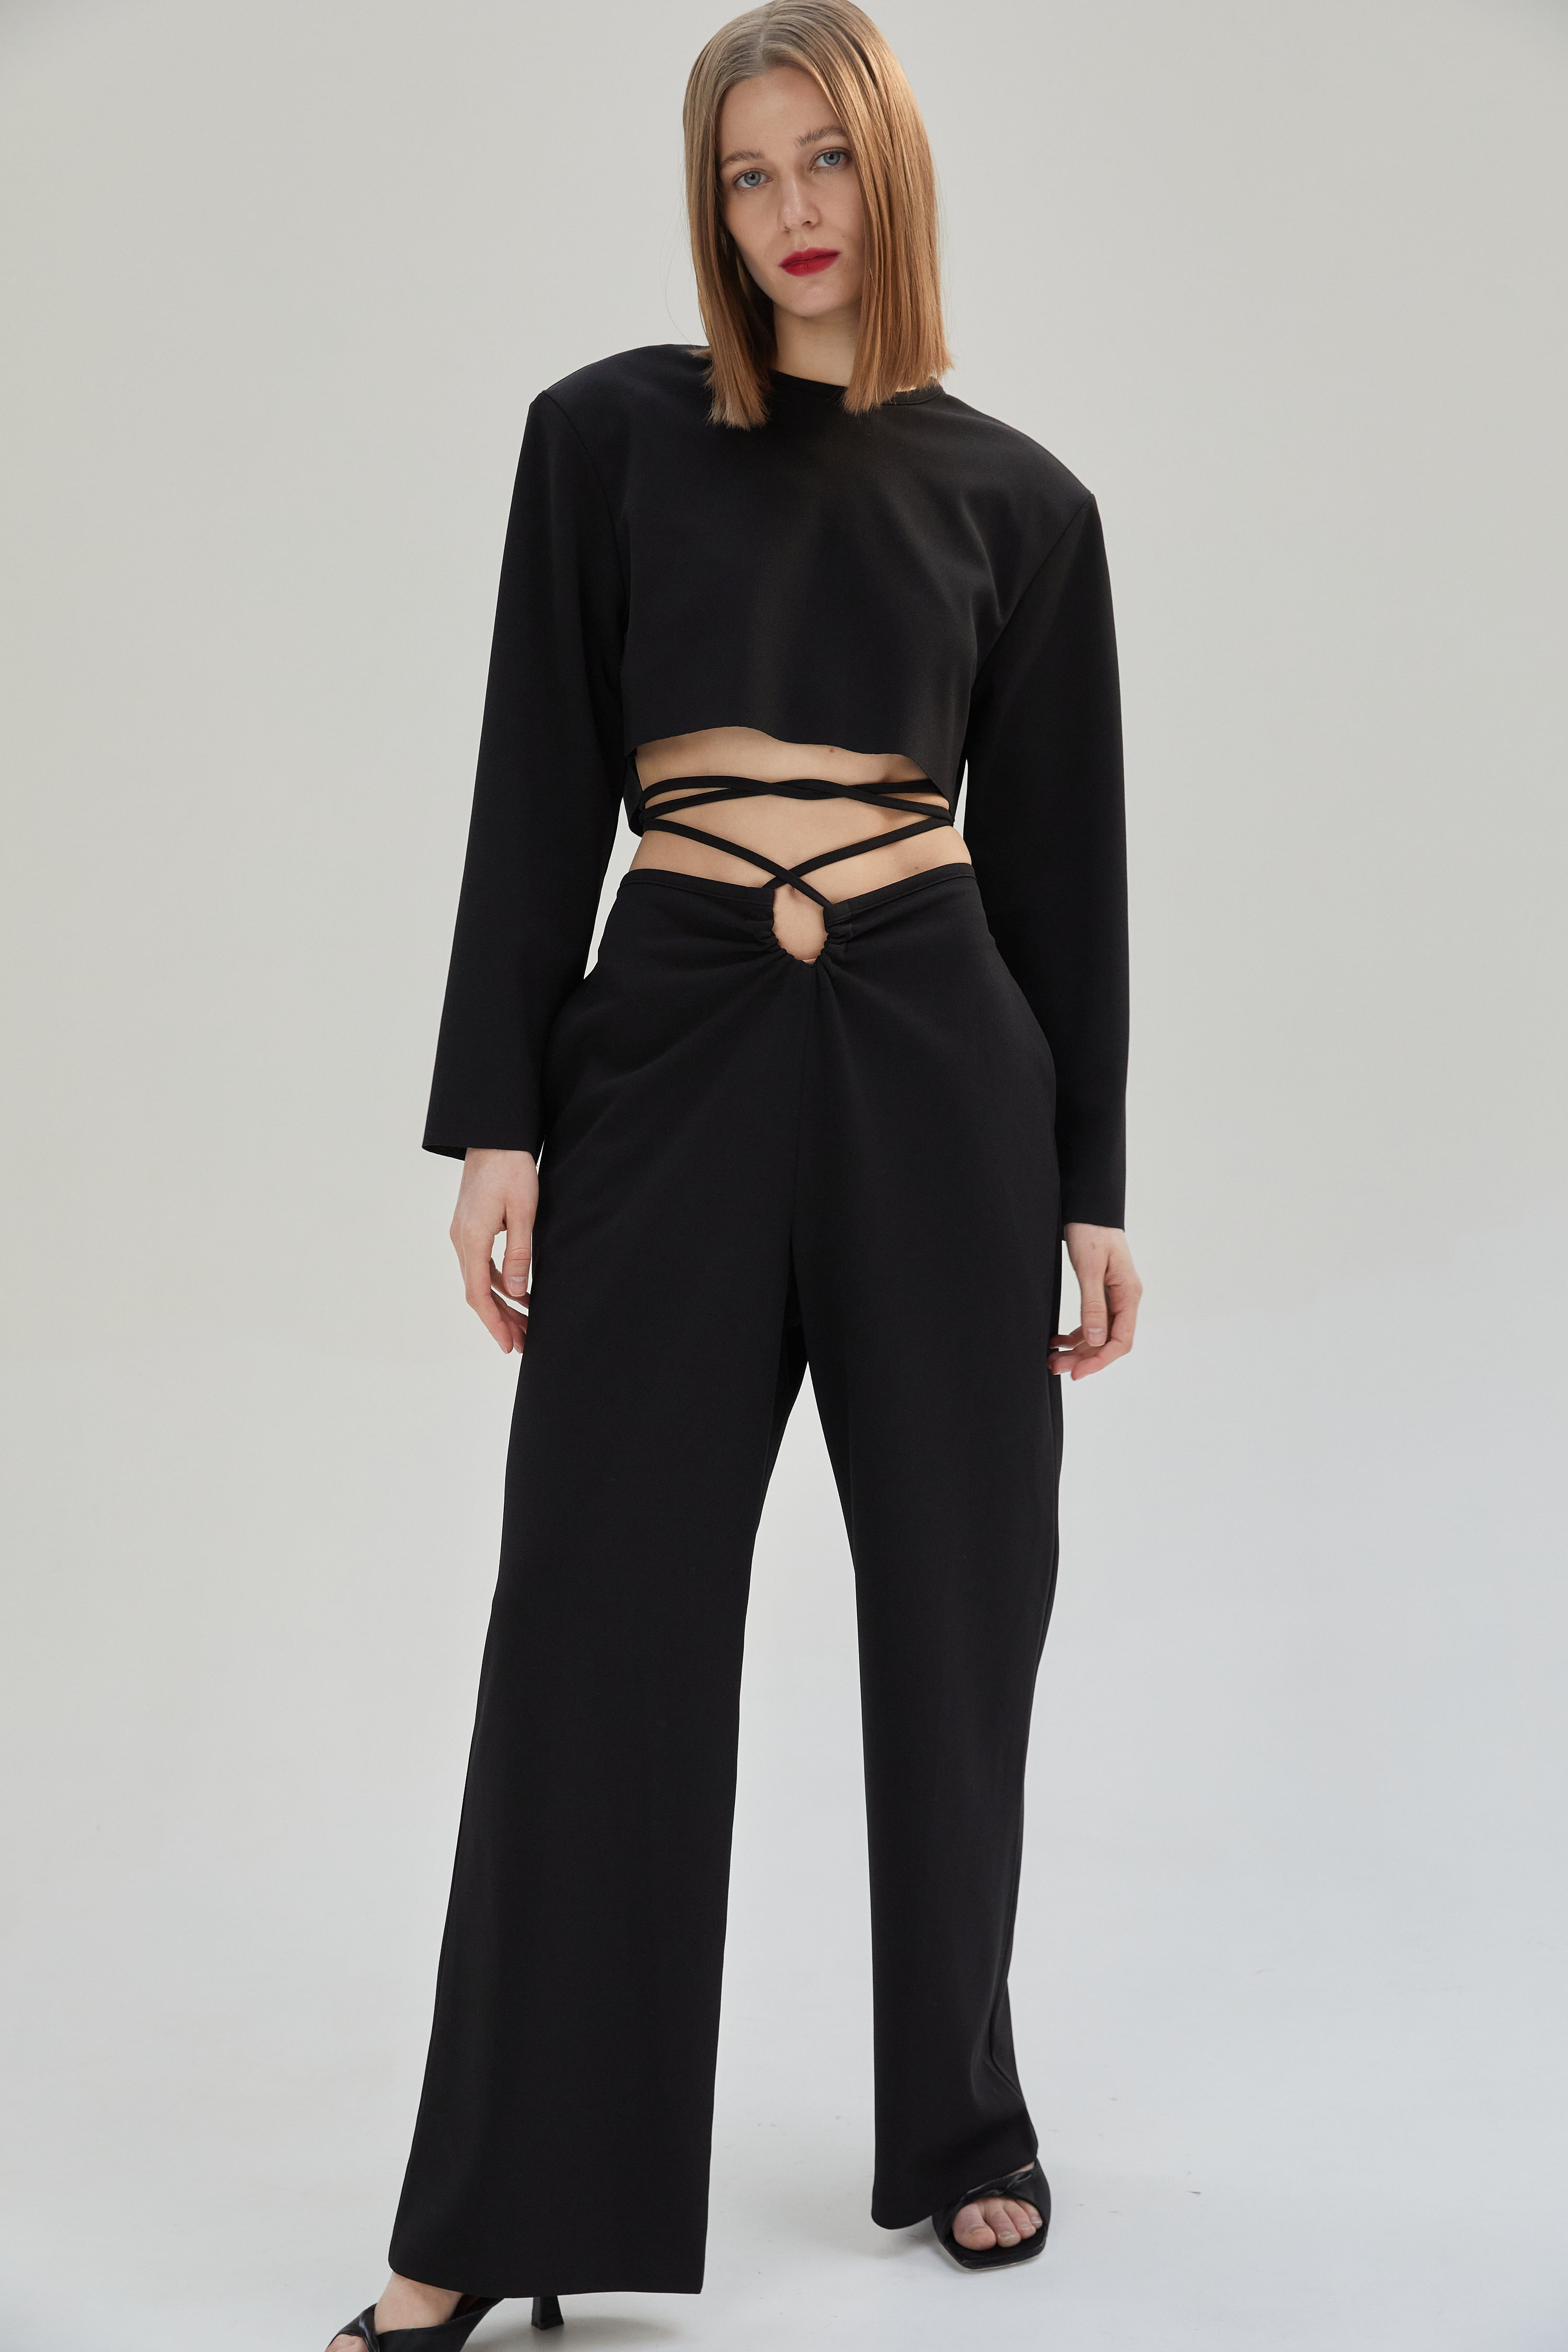 Buy Robell Black Colly Tie Waist Trousers on Sale | Cilento